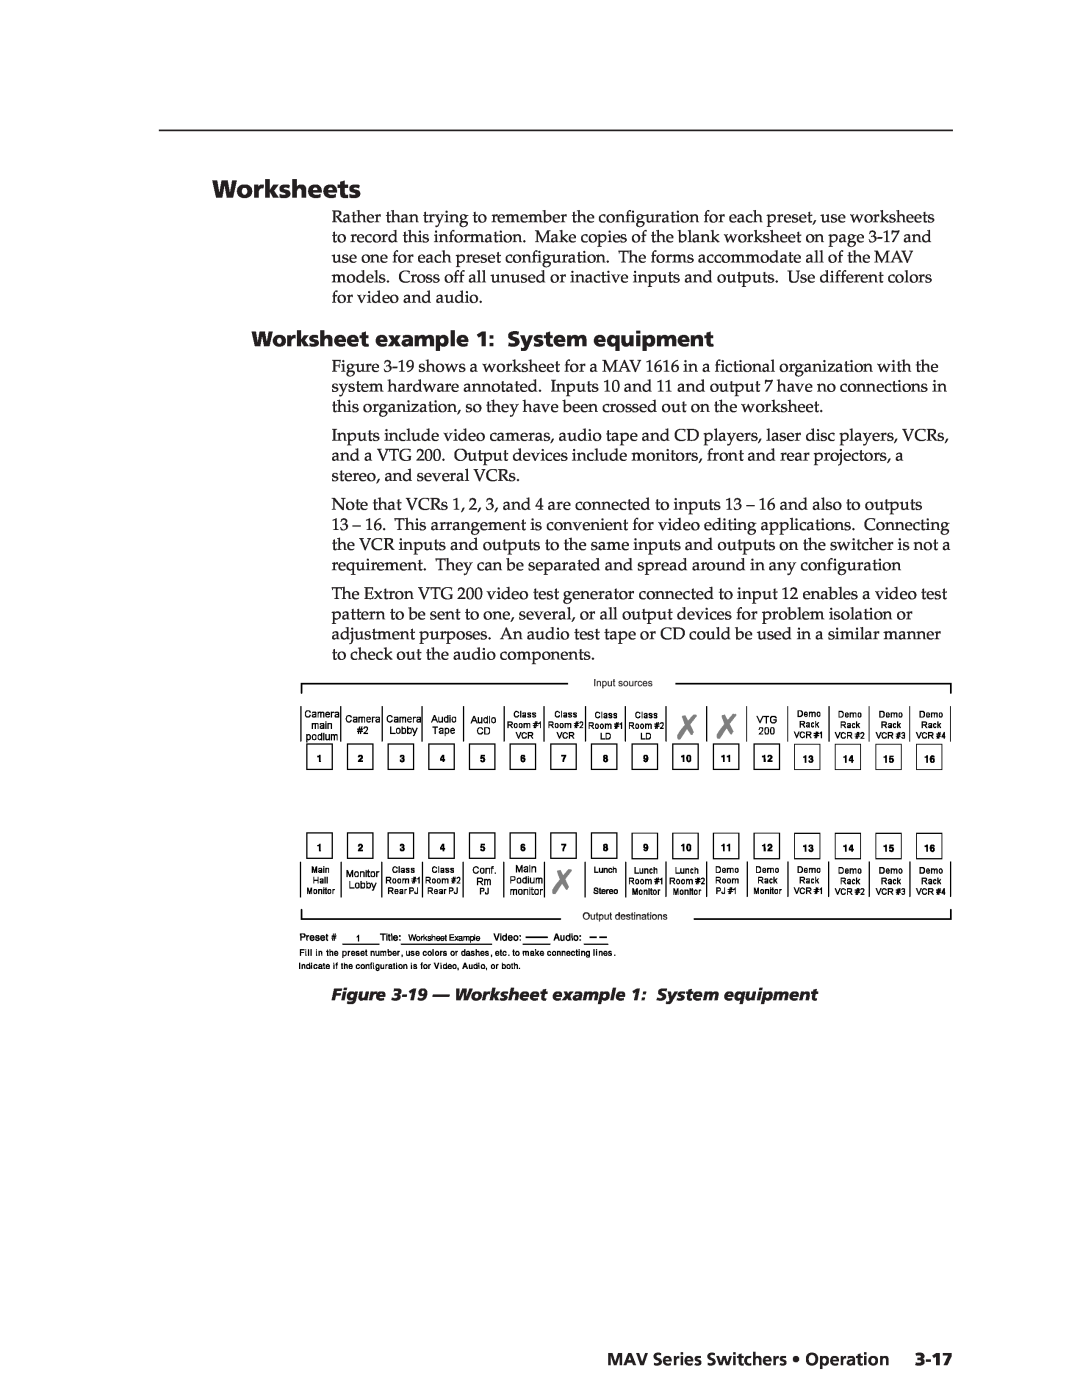 Extron electronic manual Worksheets, 19 - Worksheet example 1 System equipment, MAV Series Switchers Operation 